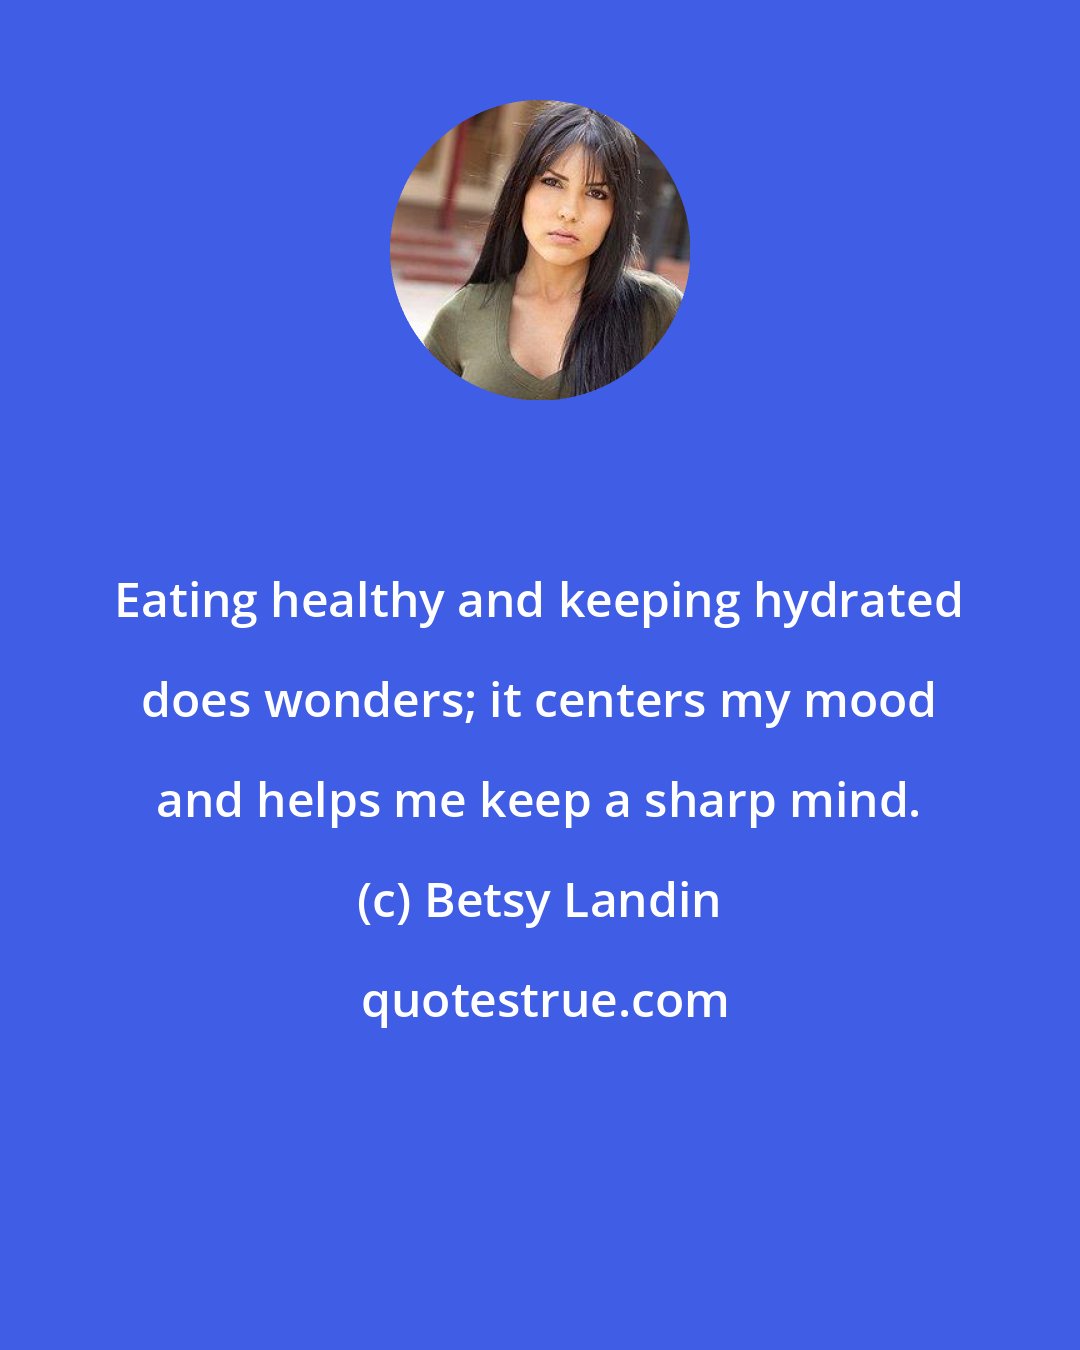 Betsy Landin: Eating healthy and keeping hydrated does wonders; it centers my mood and helps me keep a sharp mind.